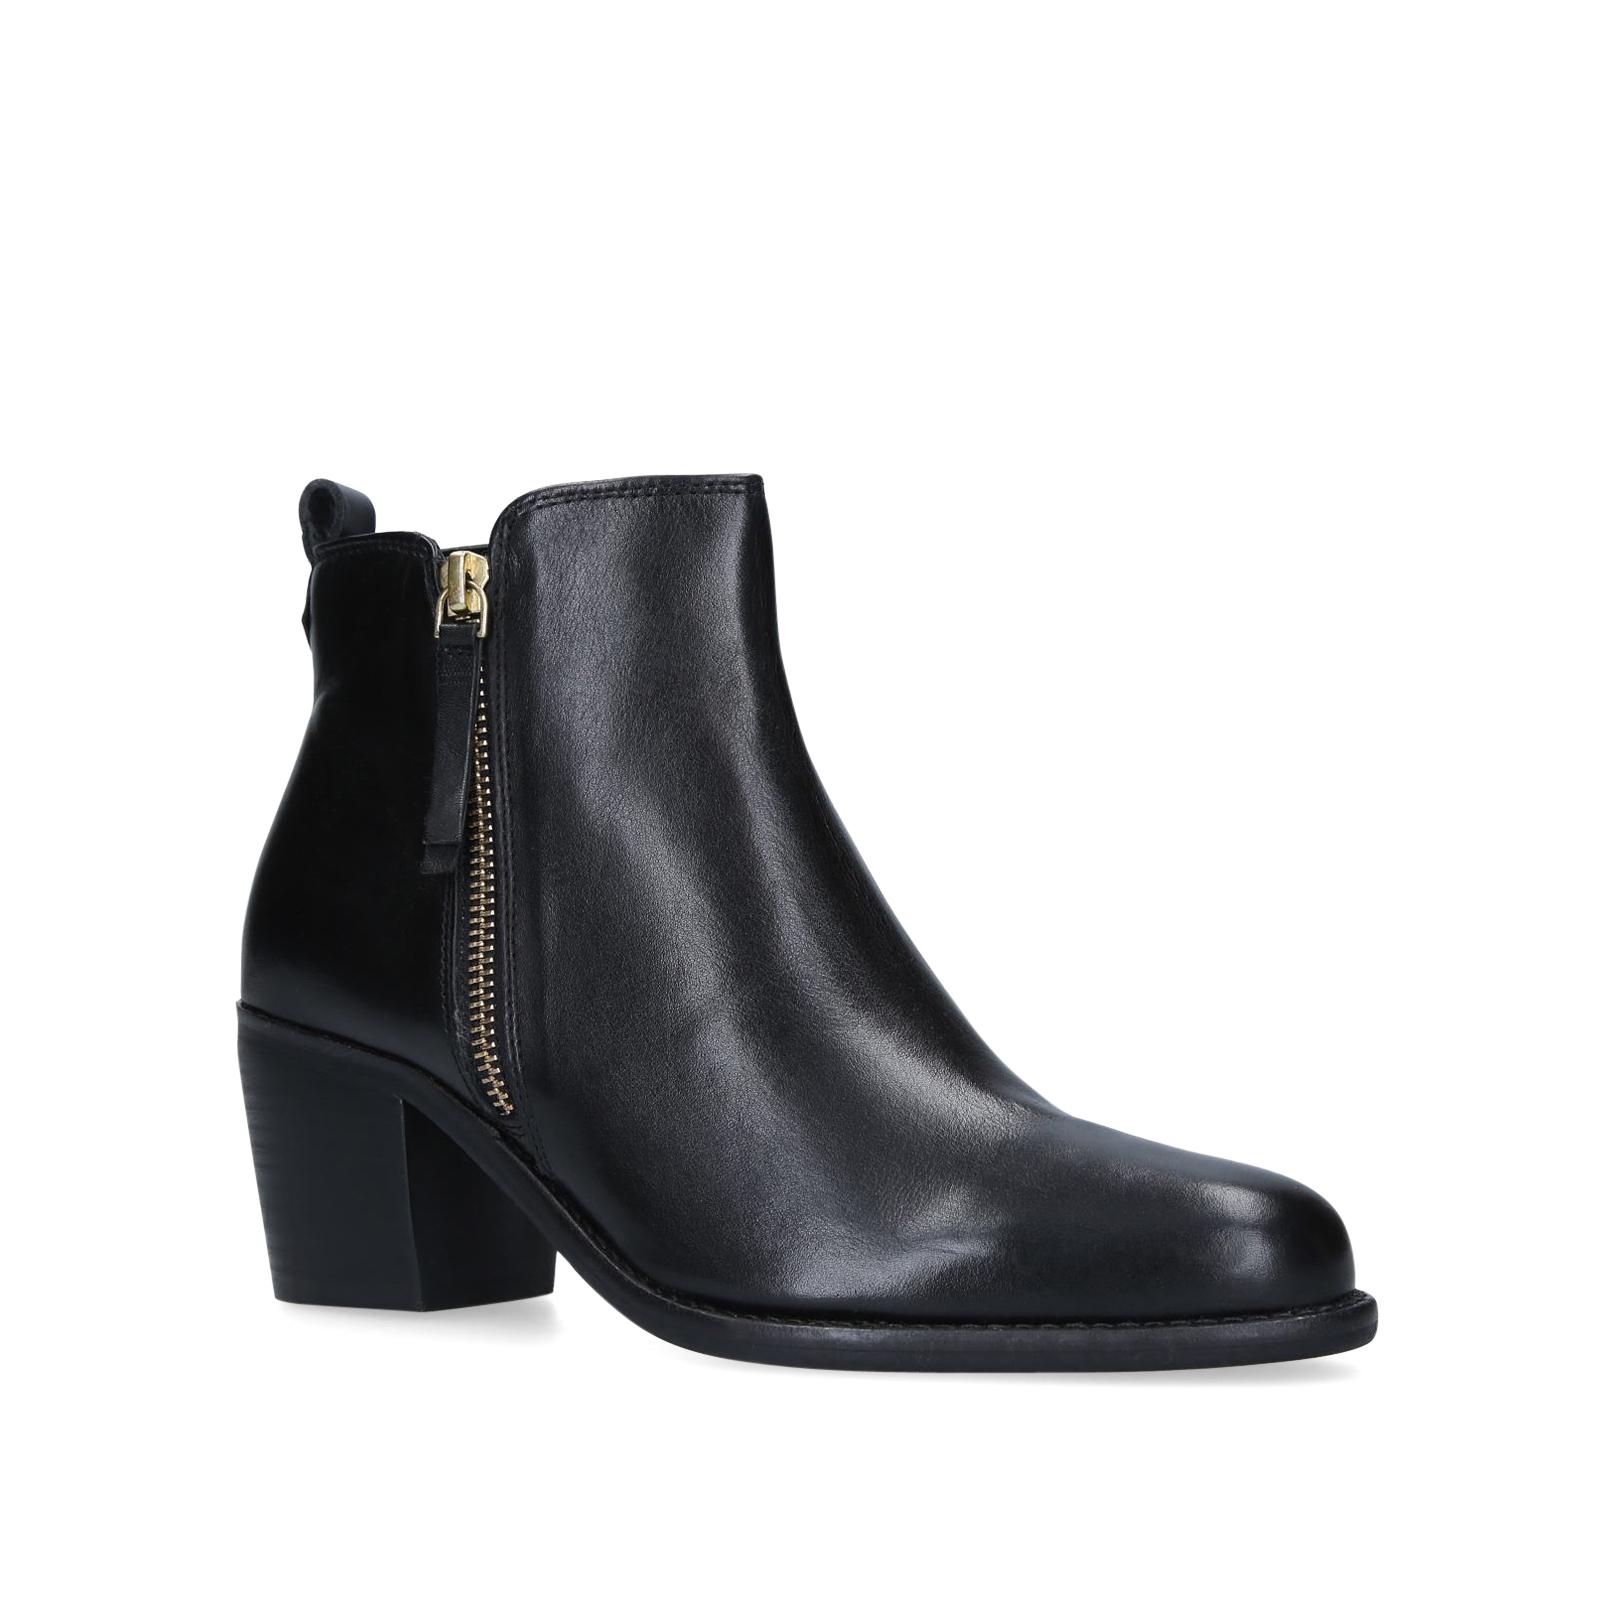 SECIL - CARVELA Ankle Boots